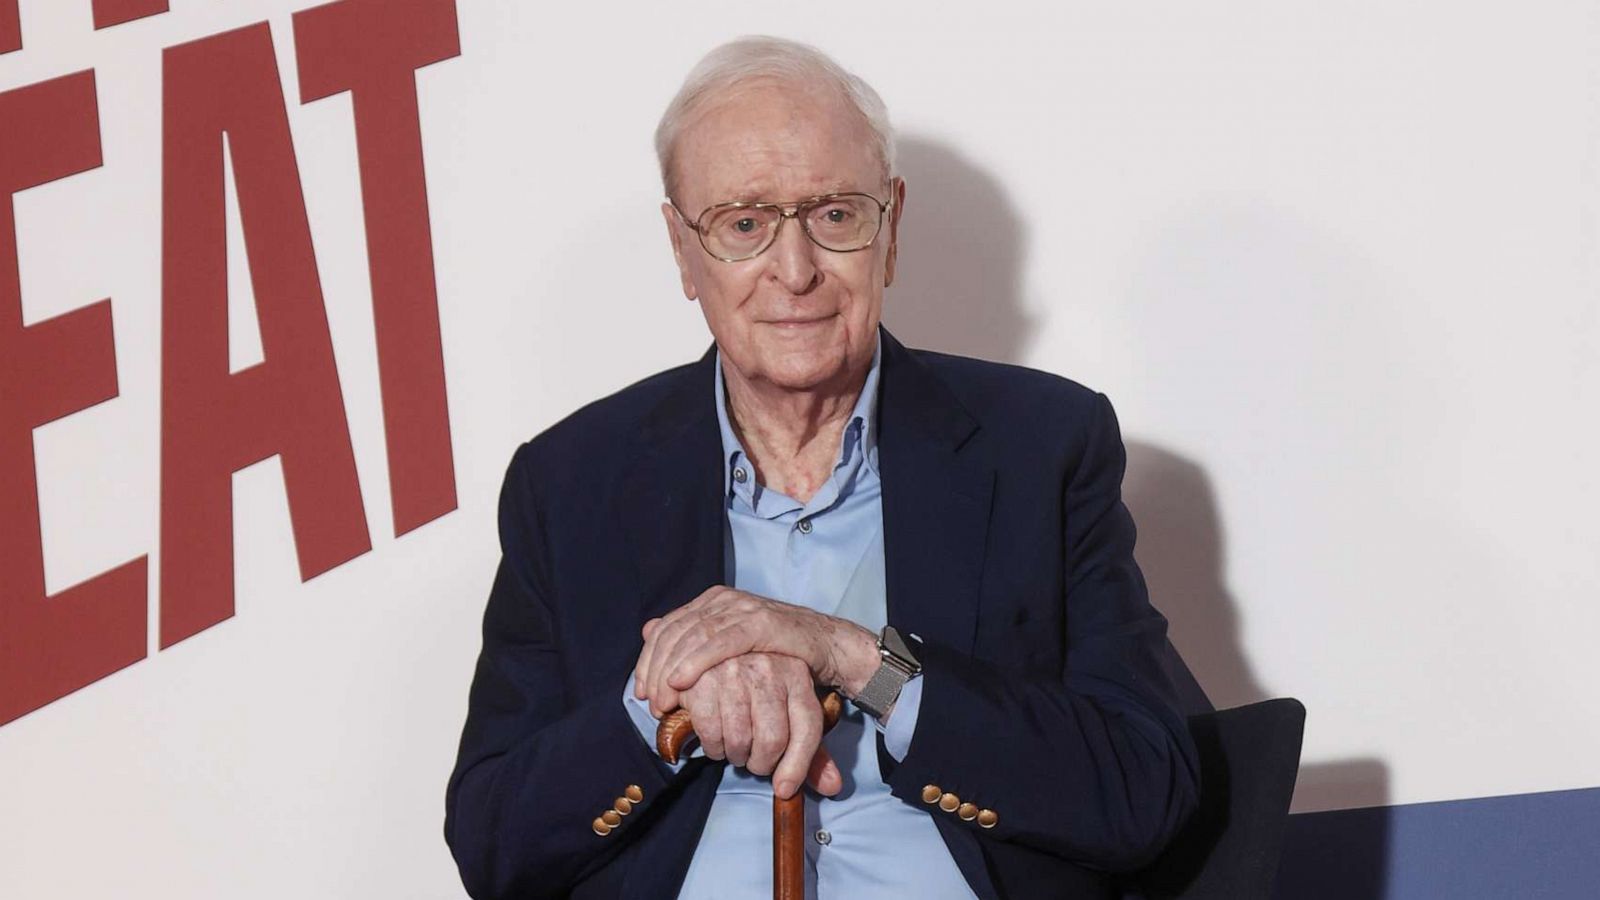 Michael Caine says he's retiring from acting after 'The Great